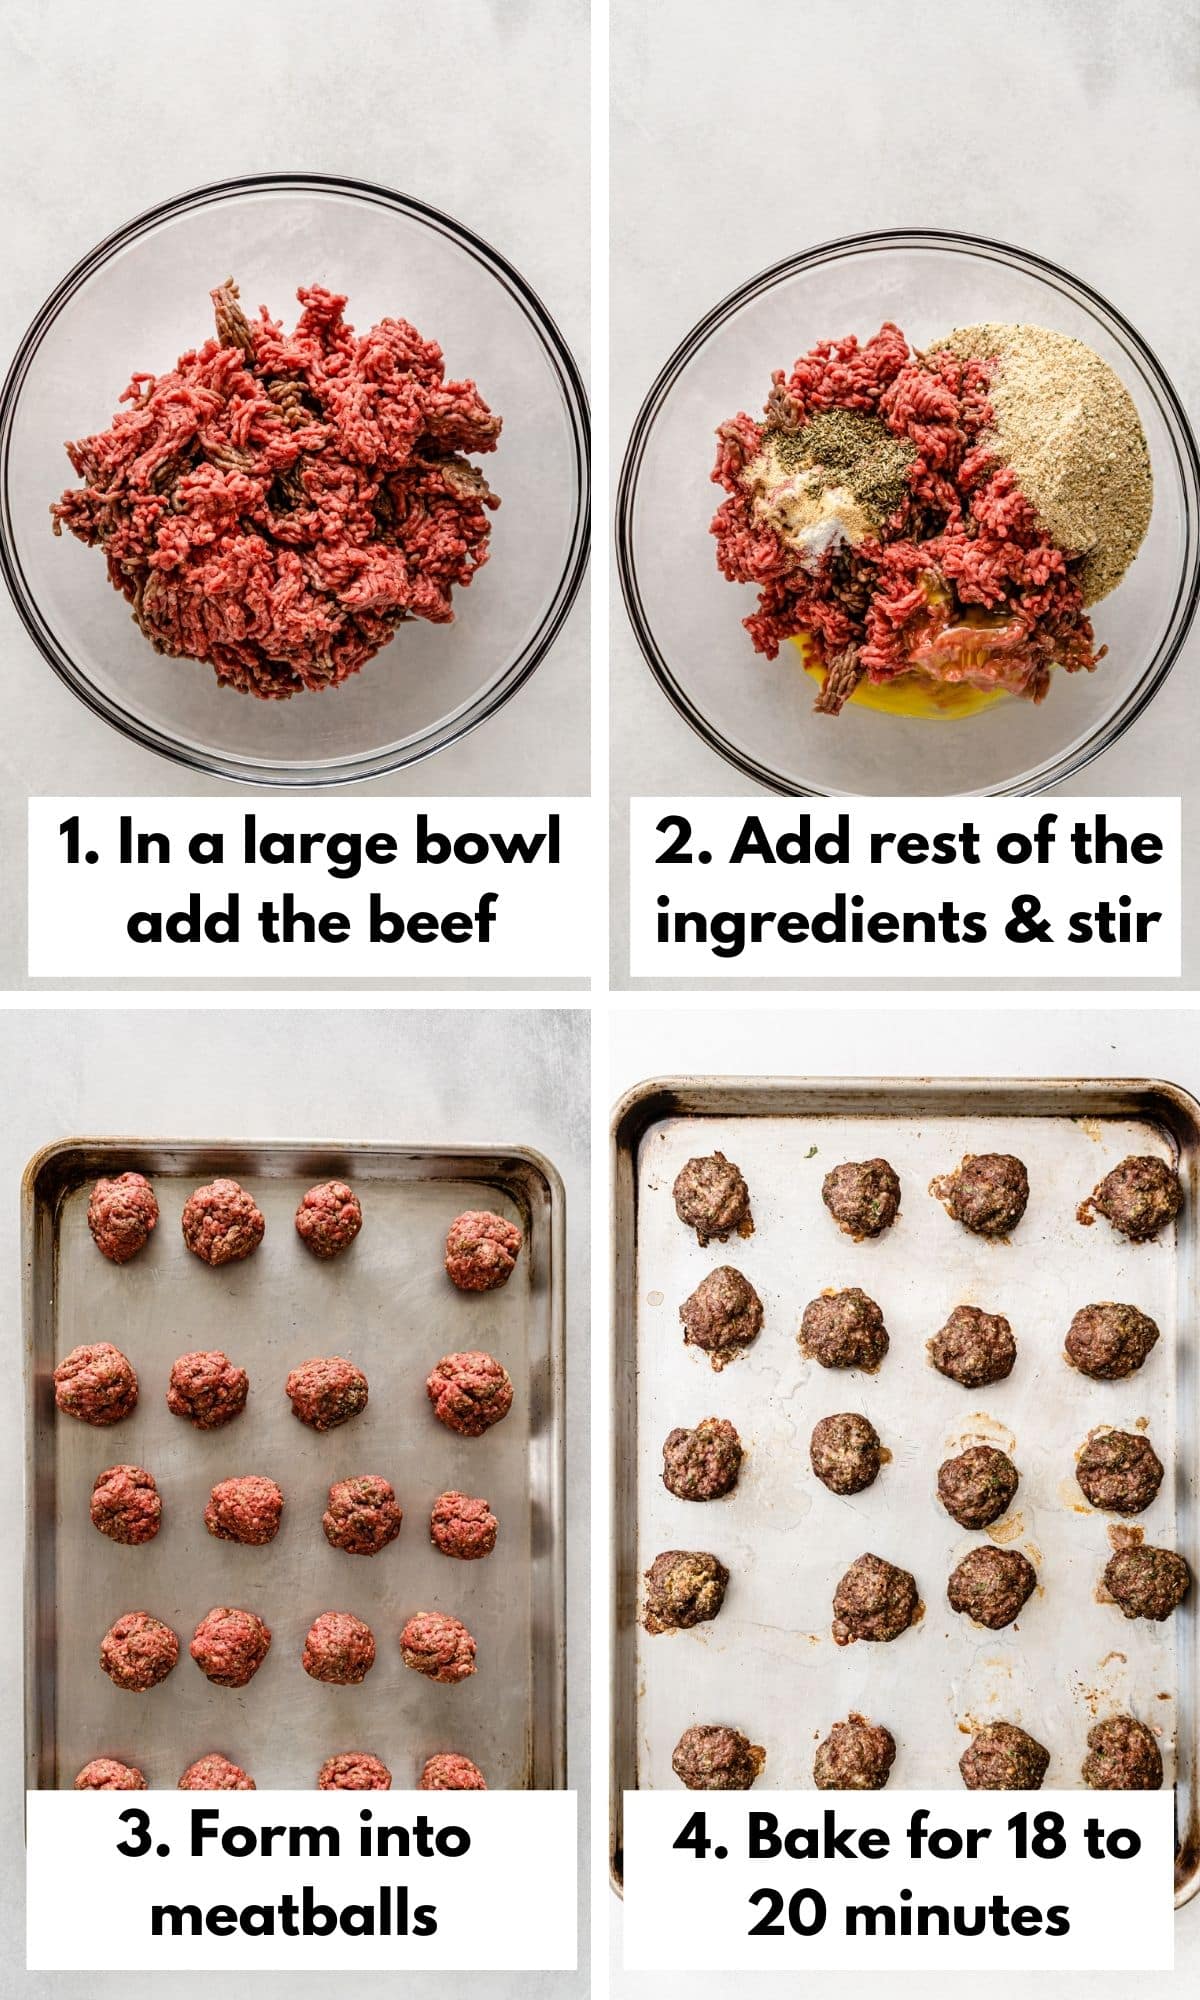 How to make baked gluten-free meatballs